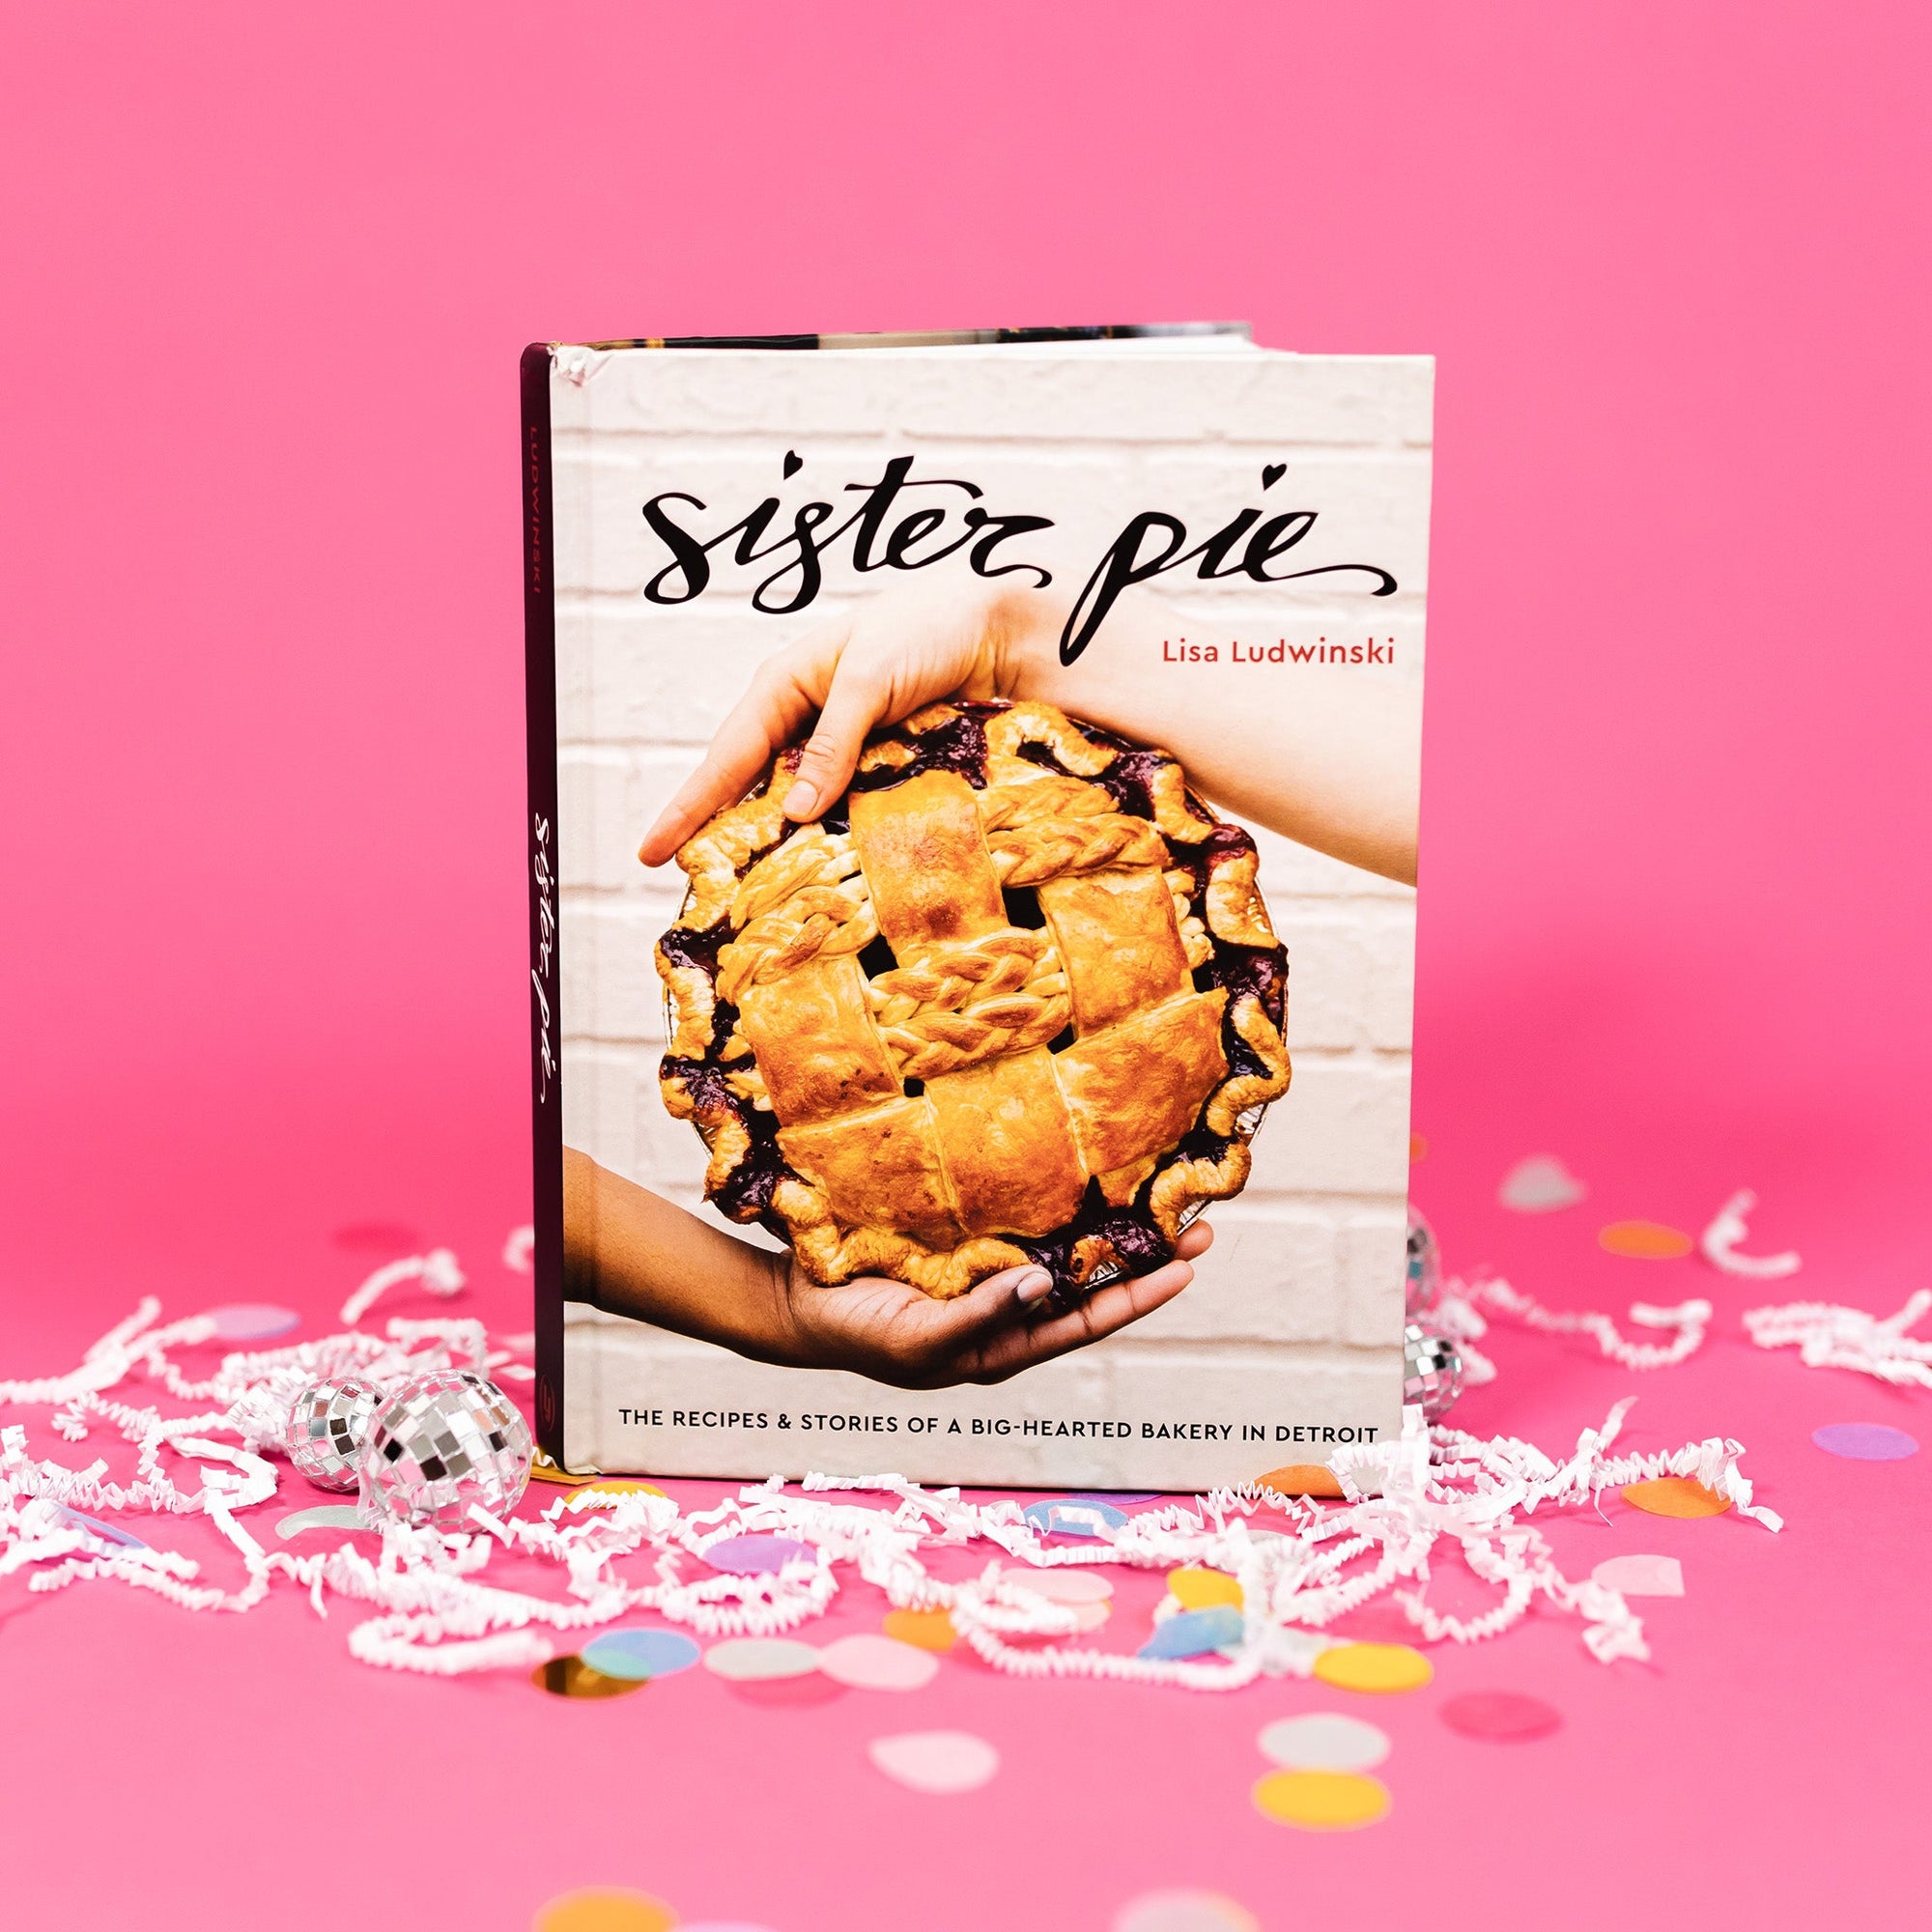 On a hot pink background sits a book with white crinkle and big, colorful confetti scattered around. There are mini disco balls. This cookbook says "sister pie" in a black handwritten lettering font and has a pitcure of two hands holding a beautiful pie with a white, brick background. On the bottom is says "The recipes & stories of a big-hearted bakery in Detroit" in a black, all caps block font.